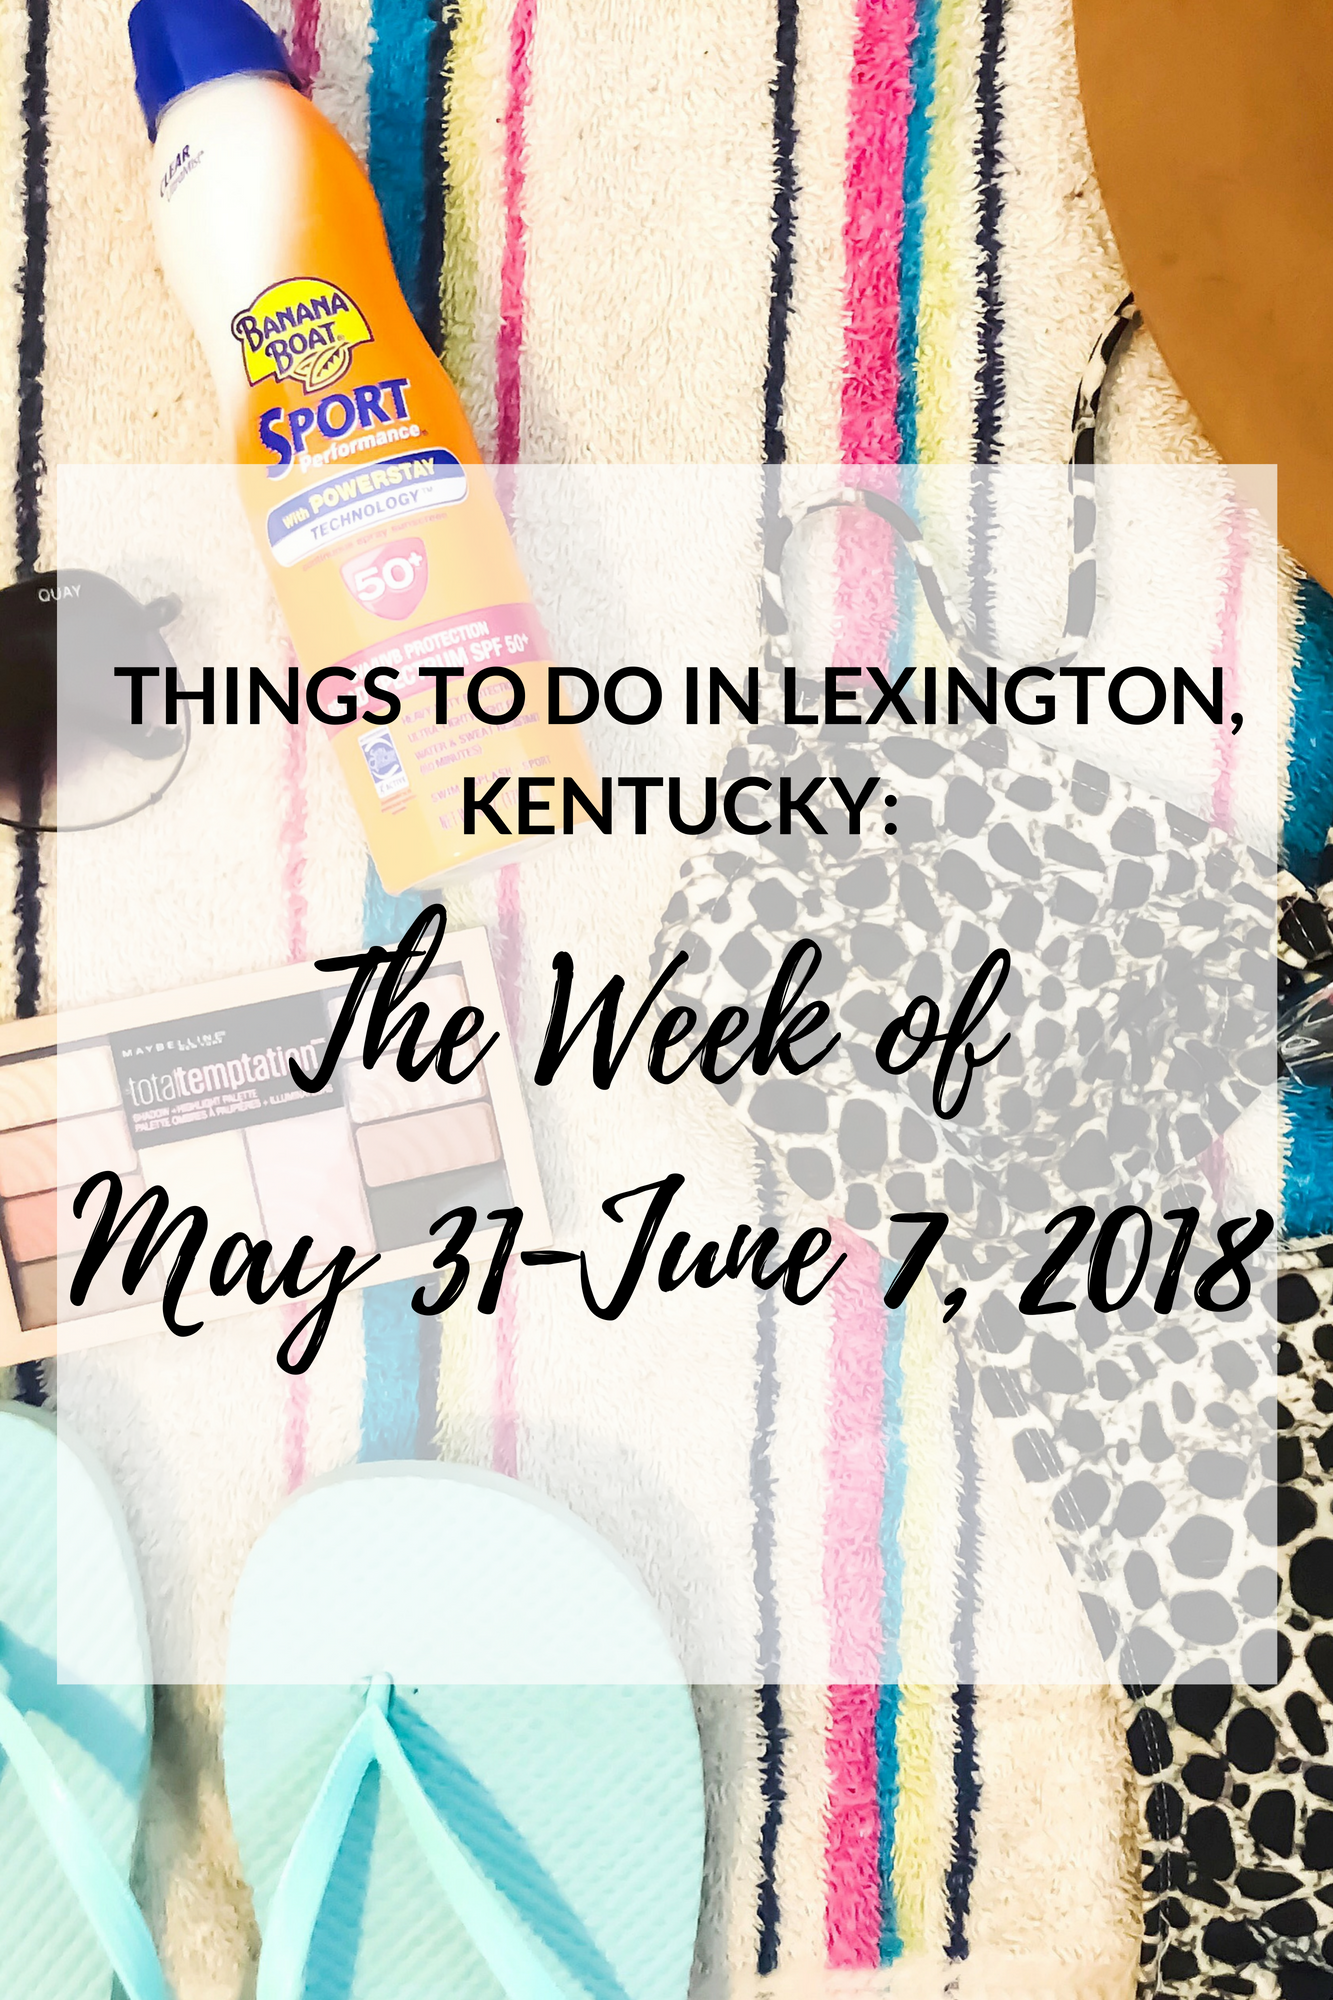 We've made it through another month!! I've put together a list of events for the upcoming week, so you can be entertained. However, this time, I've handpicked the events and included the ones that I think everyone would enjoy the most! #sharethelex #travelky #visitlex #lexingtonky #kentucky #shoplocal #spring #summer #thingstodo #event